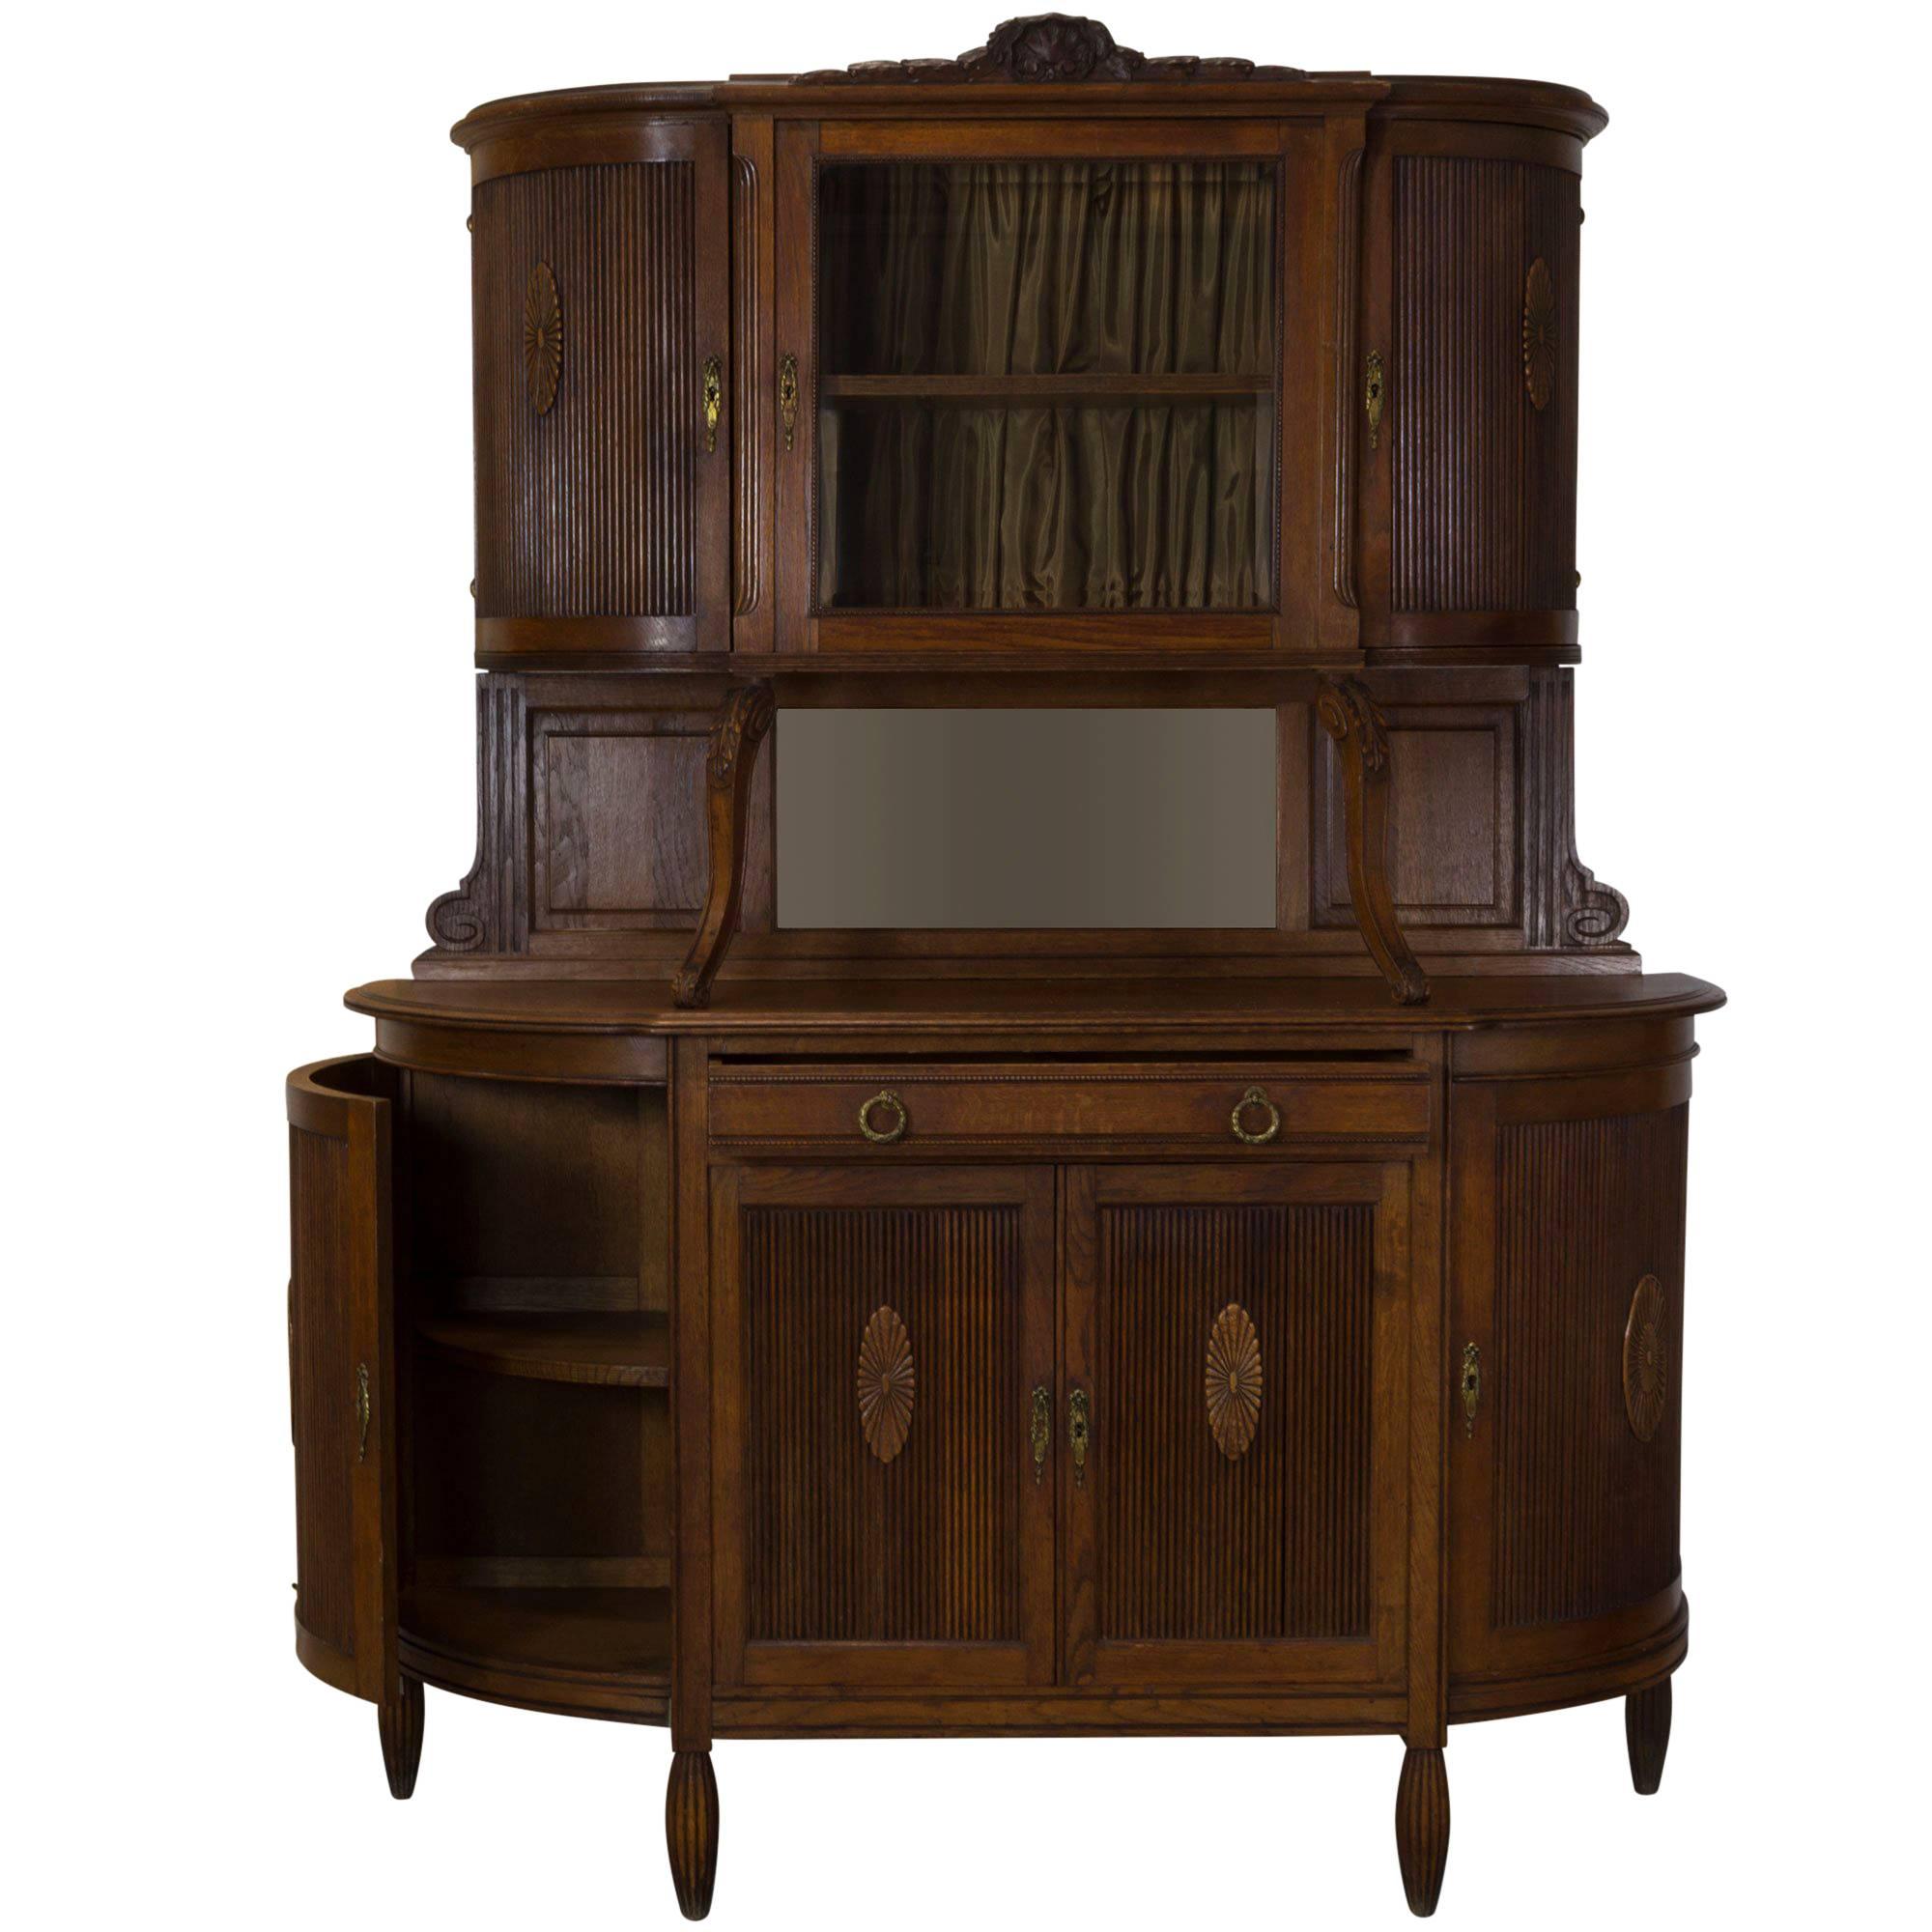 The warm and inviting tones of this unique cabinet is sure to fit with many different styles – Louis XV, Louis XVI, Neoclassical, French Country or traditional. It has the perfect balance of plenty of storage and display areas. There is a centre